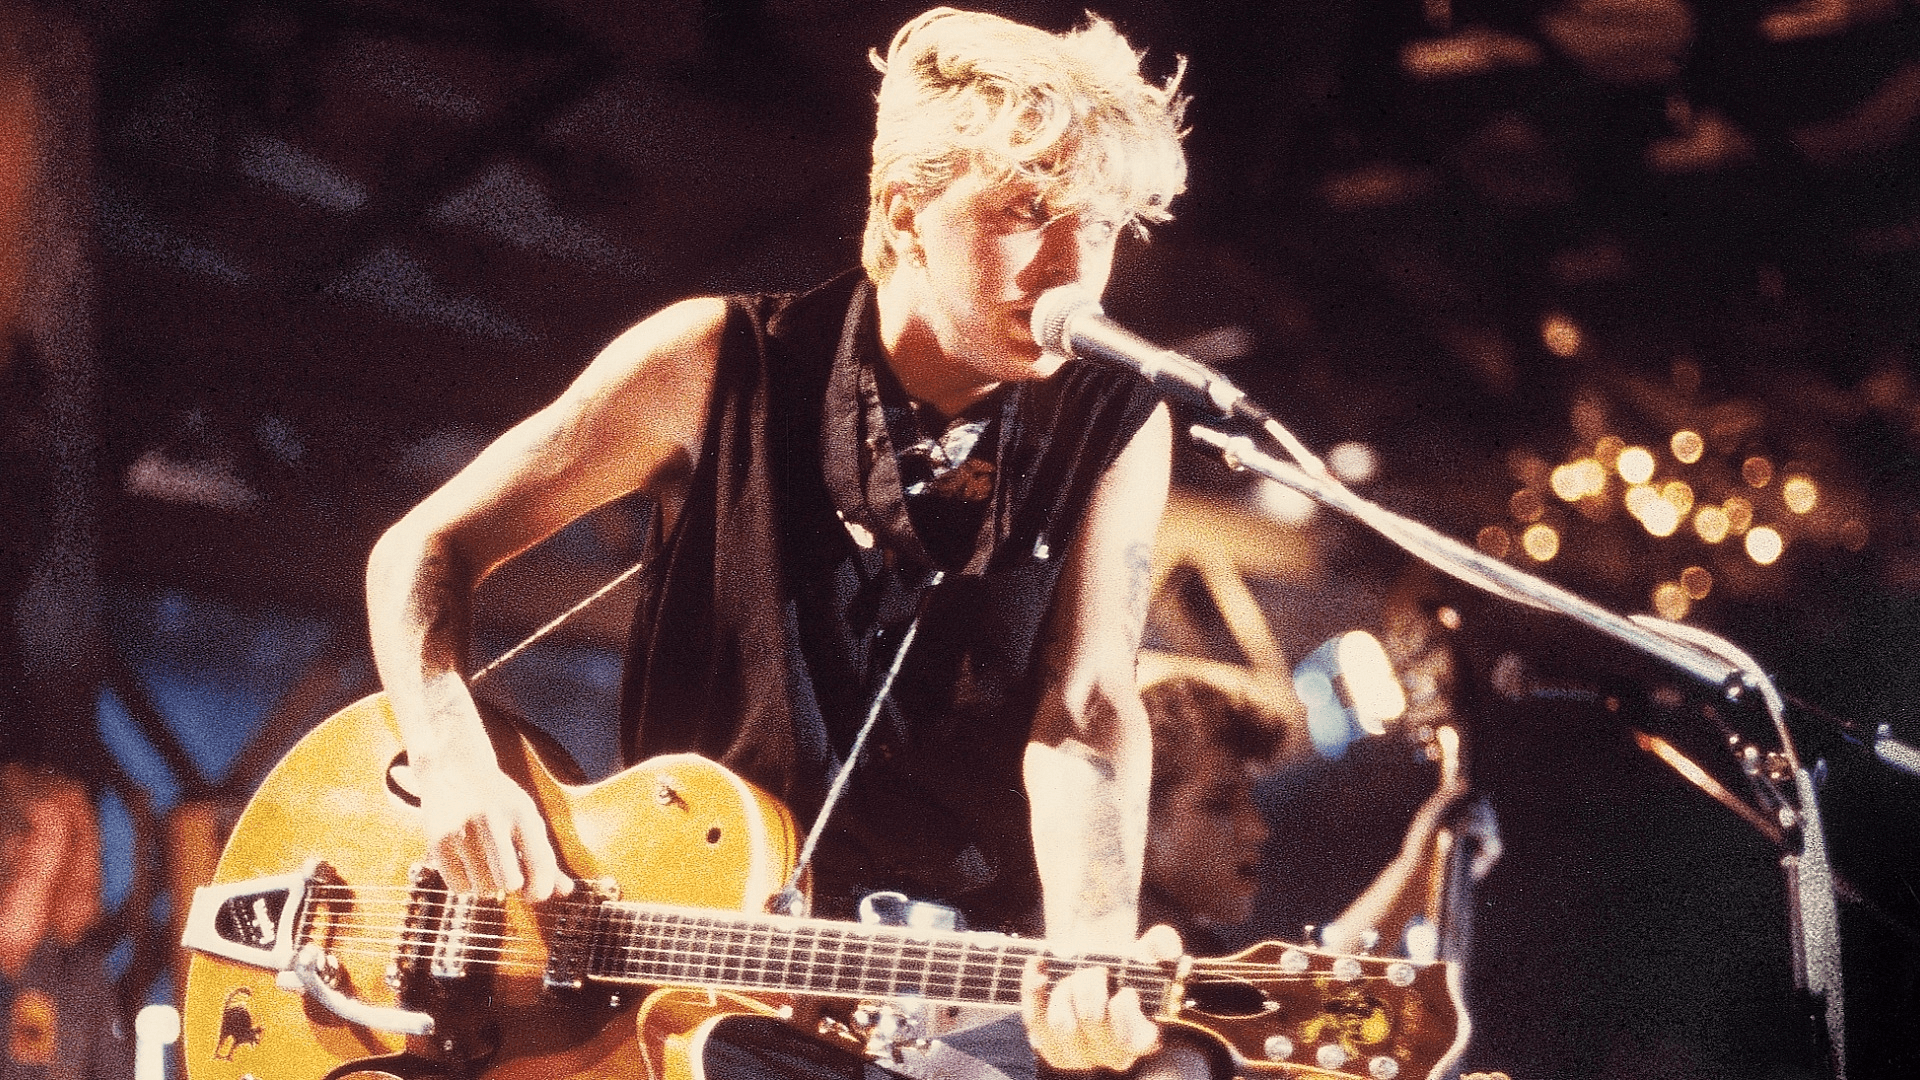 Stray Cats - Live at Montreux, 1981